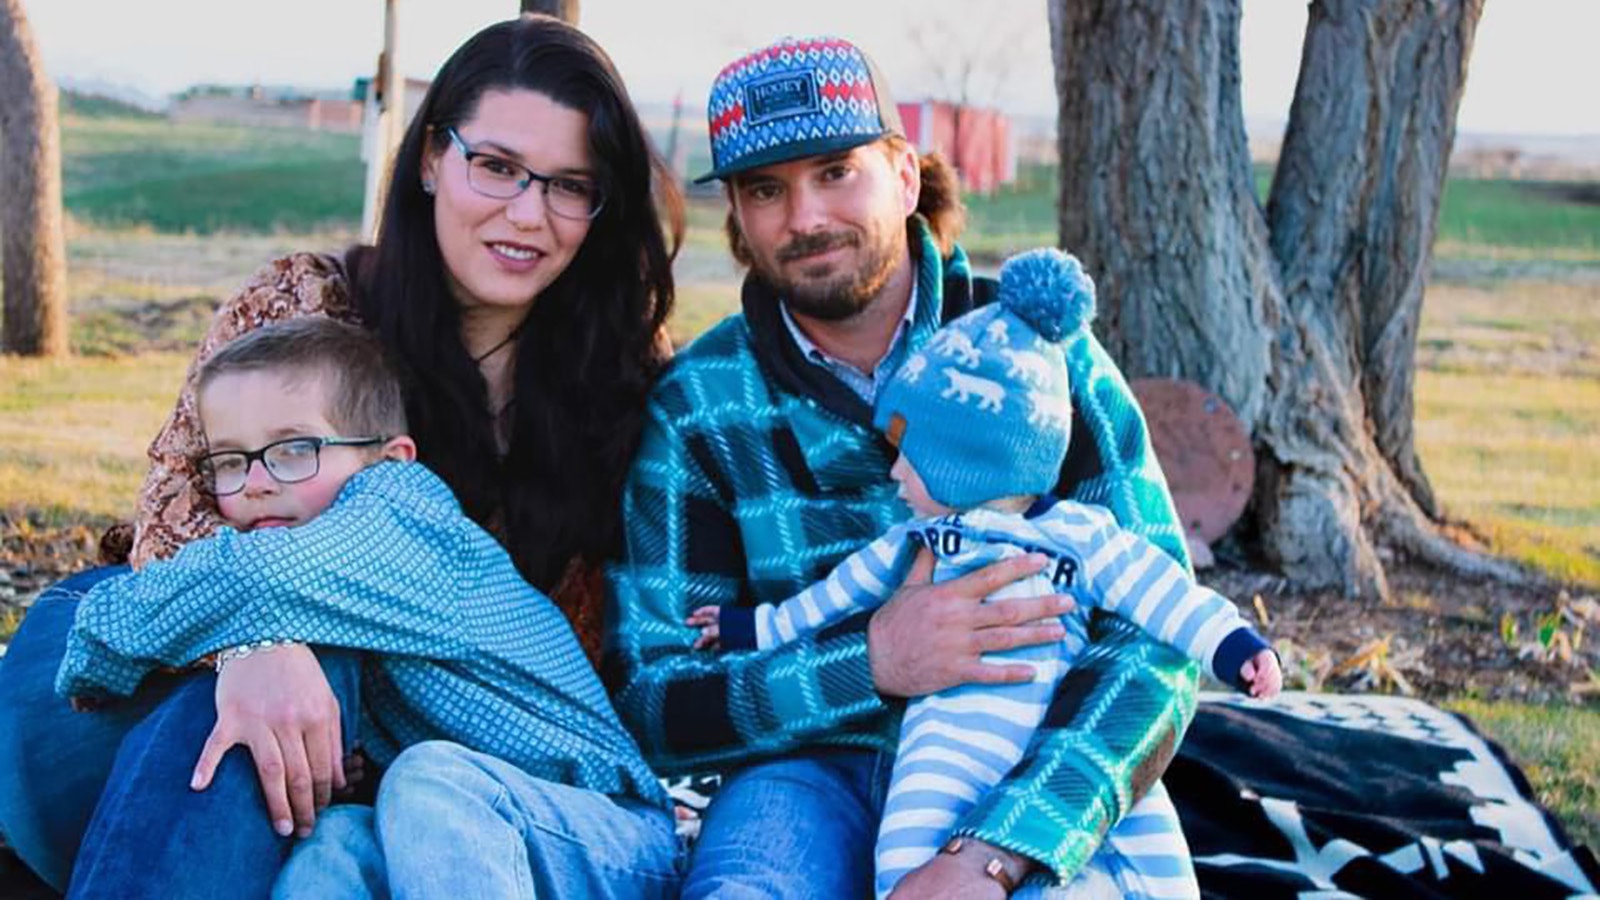 Reatta Grywusiewicz and Rich Wetsch have moved to Montana since an alleged child abuse incident with their 14-month-old son.